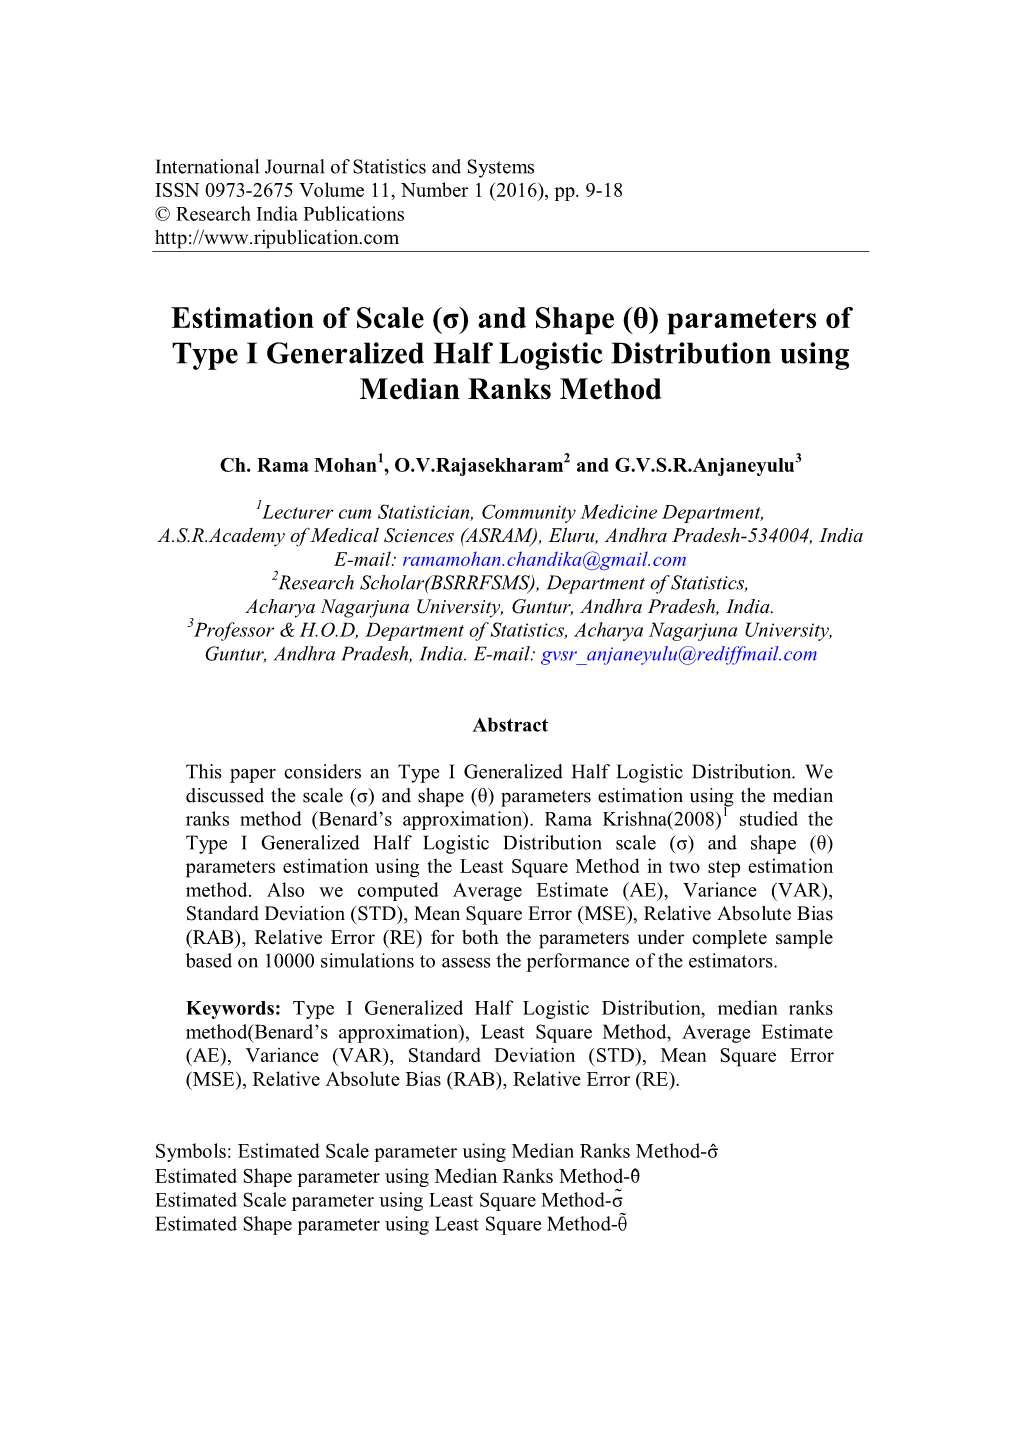 Estimation of Scale (Σ) and Shape (Θ) Parameters of Type I Generalized Half Logistic Distribution Using Median Ranks Method